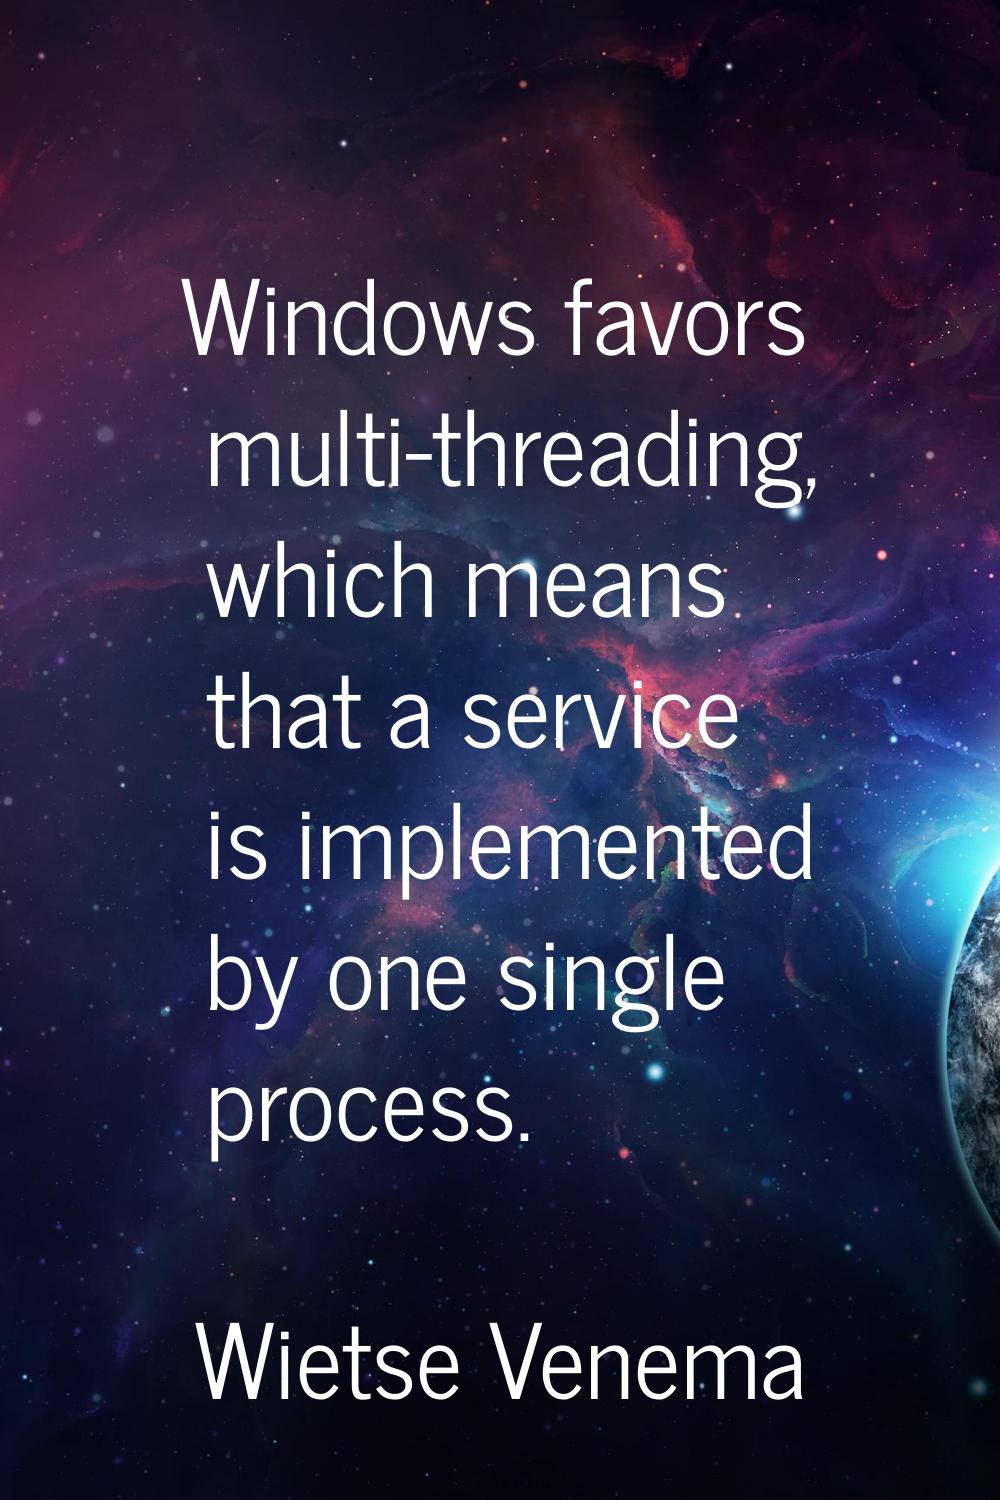 Windows favors multi-threading, which means that a service is implemented by one single process.